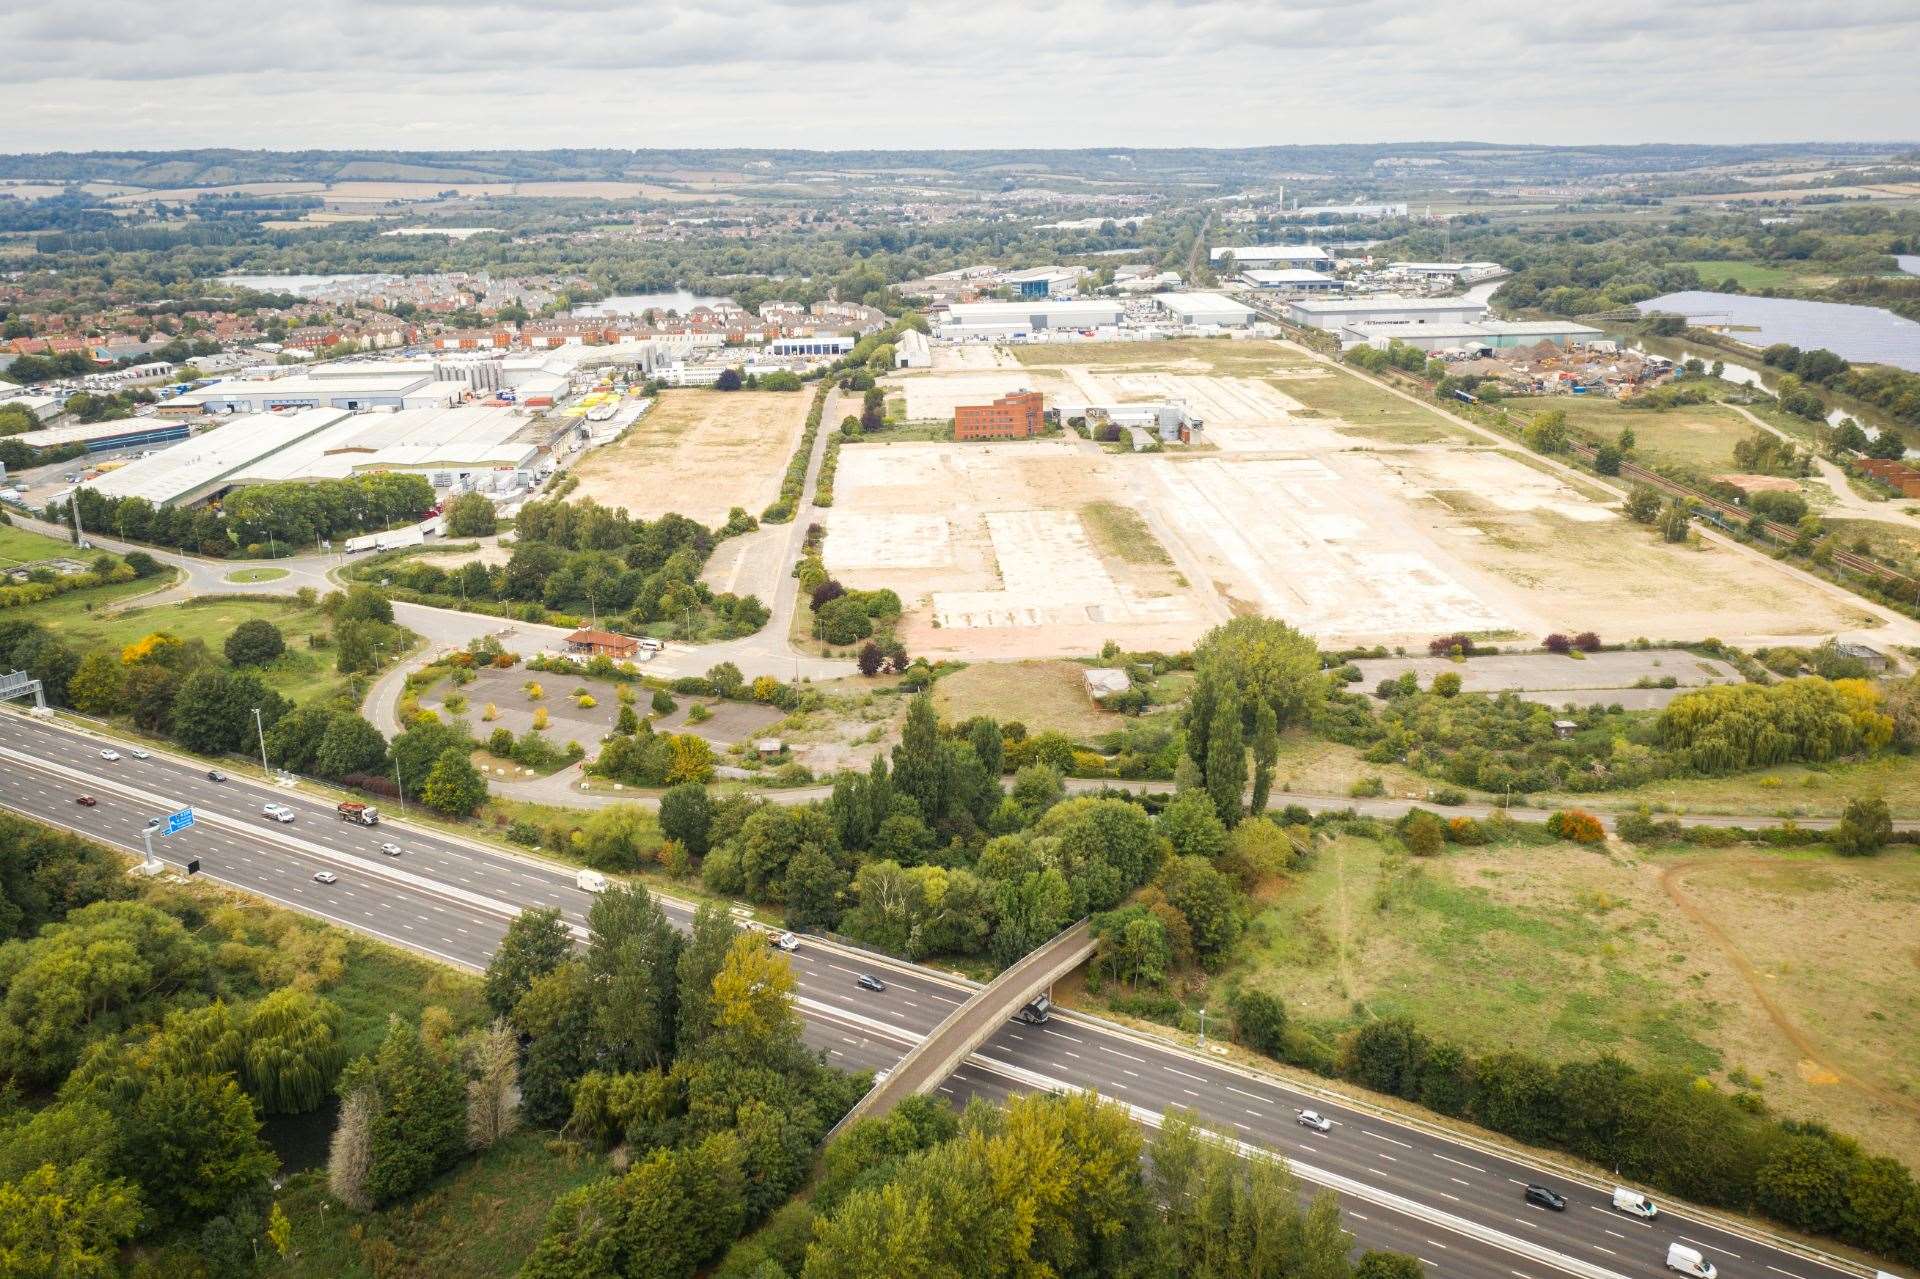 The treatment facility will sit on part of the old Aylesford Newsprint site